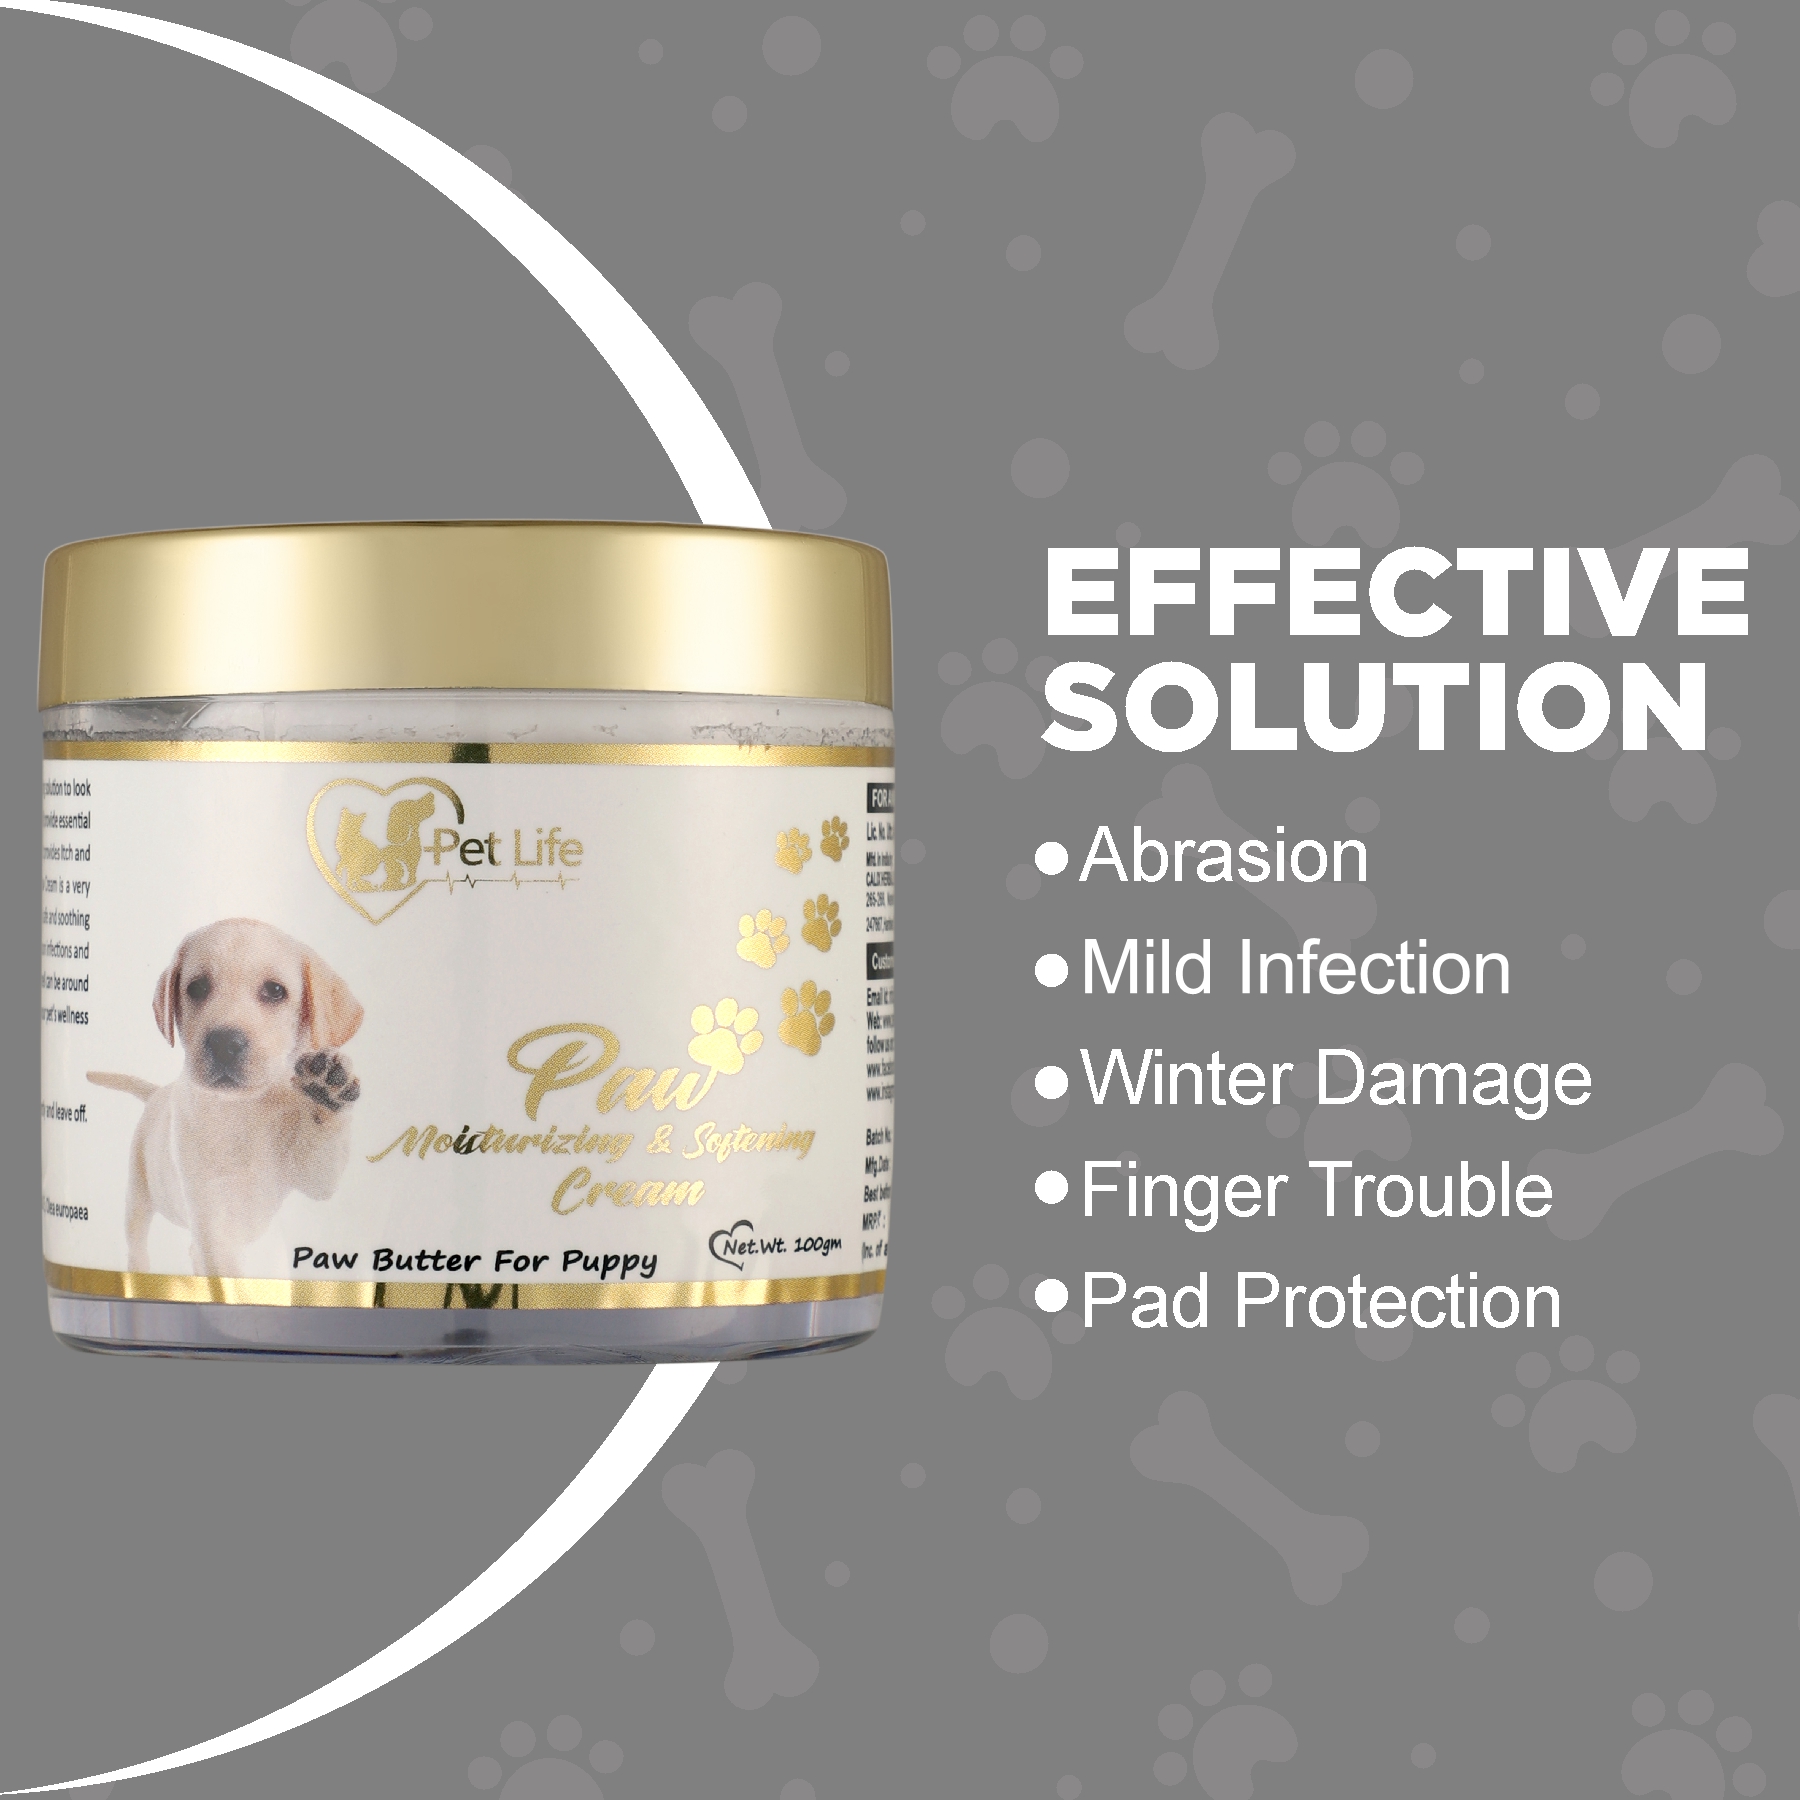 Organic Paw Moisturizing & Softening Cream For Puppy Cracked & Chapped Paws|